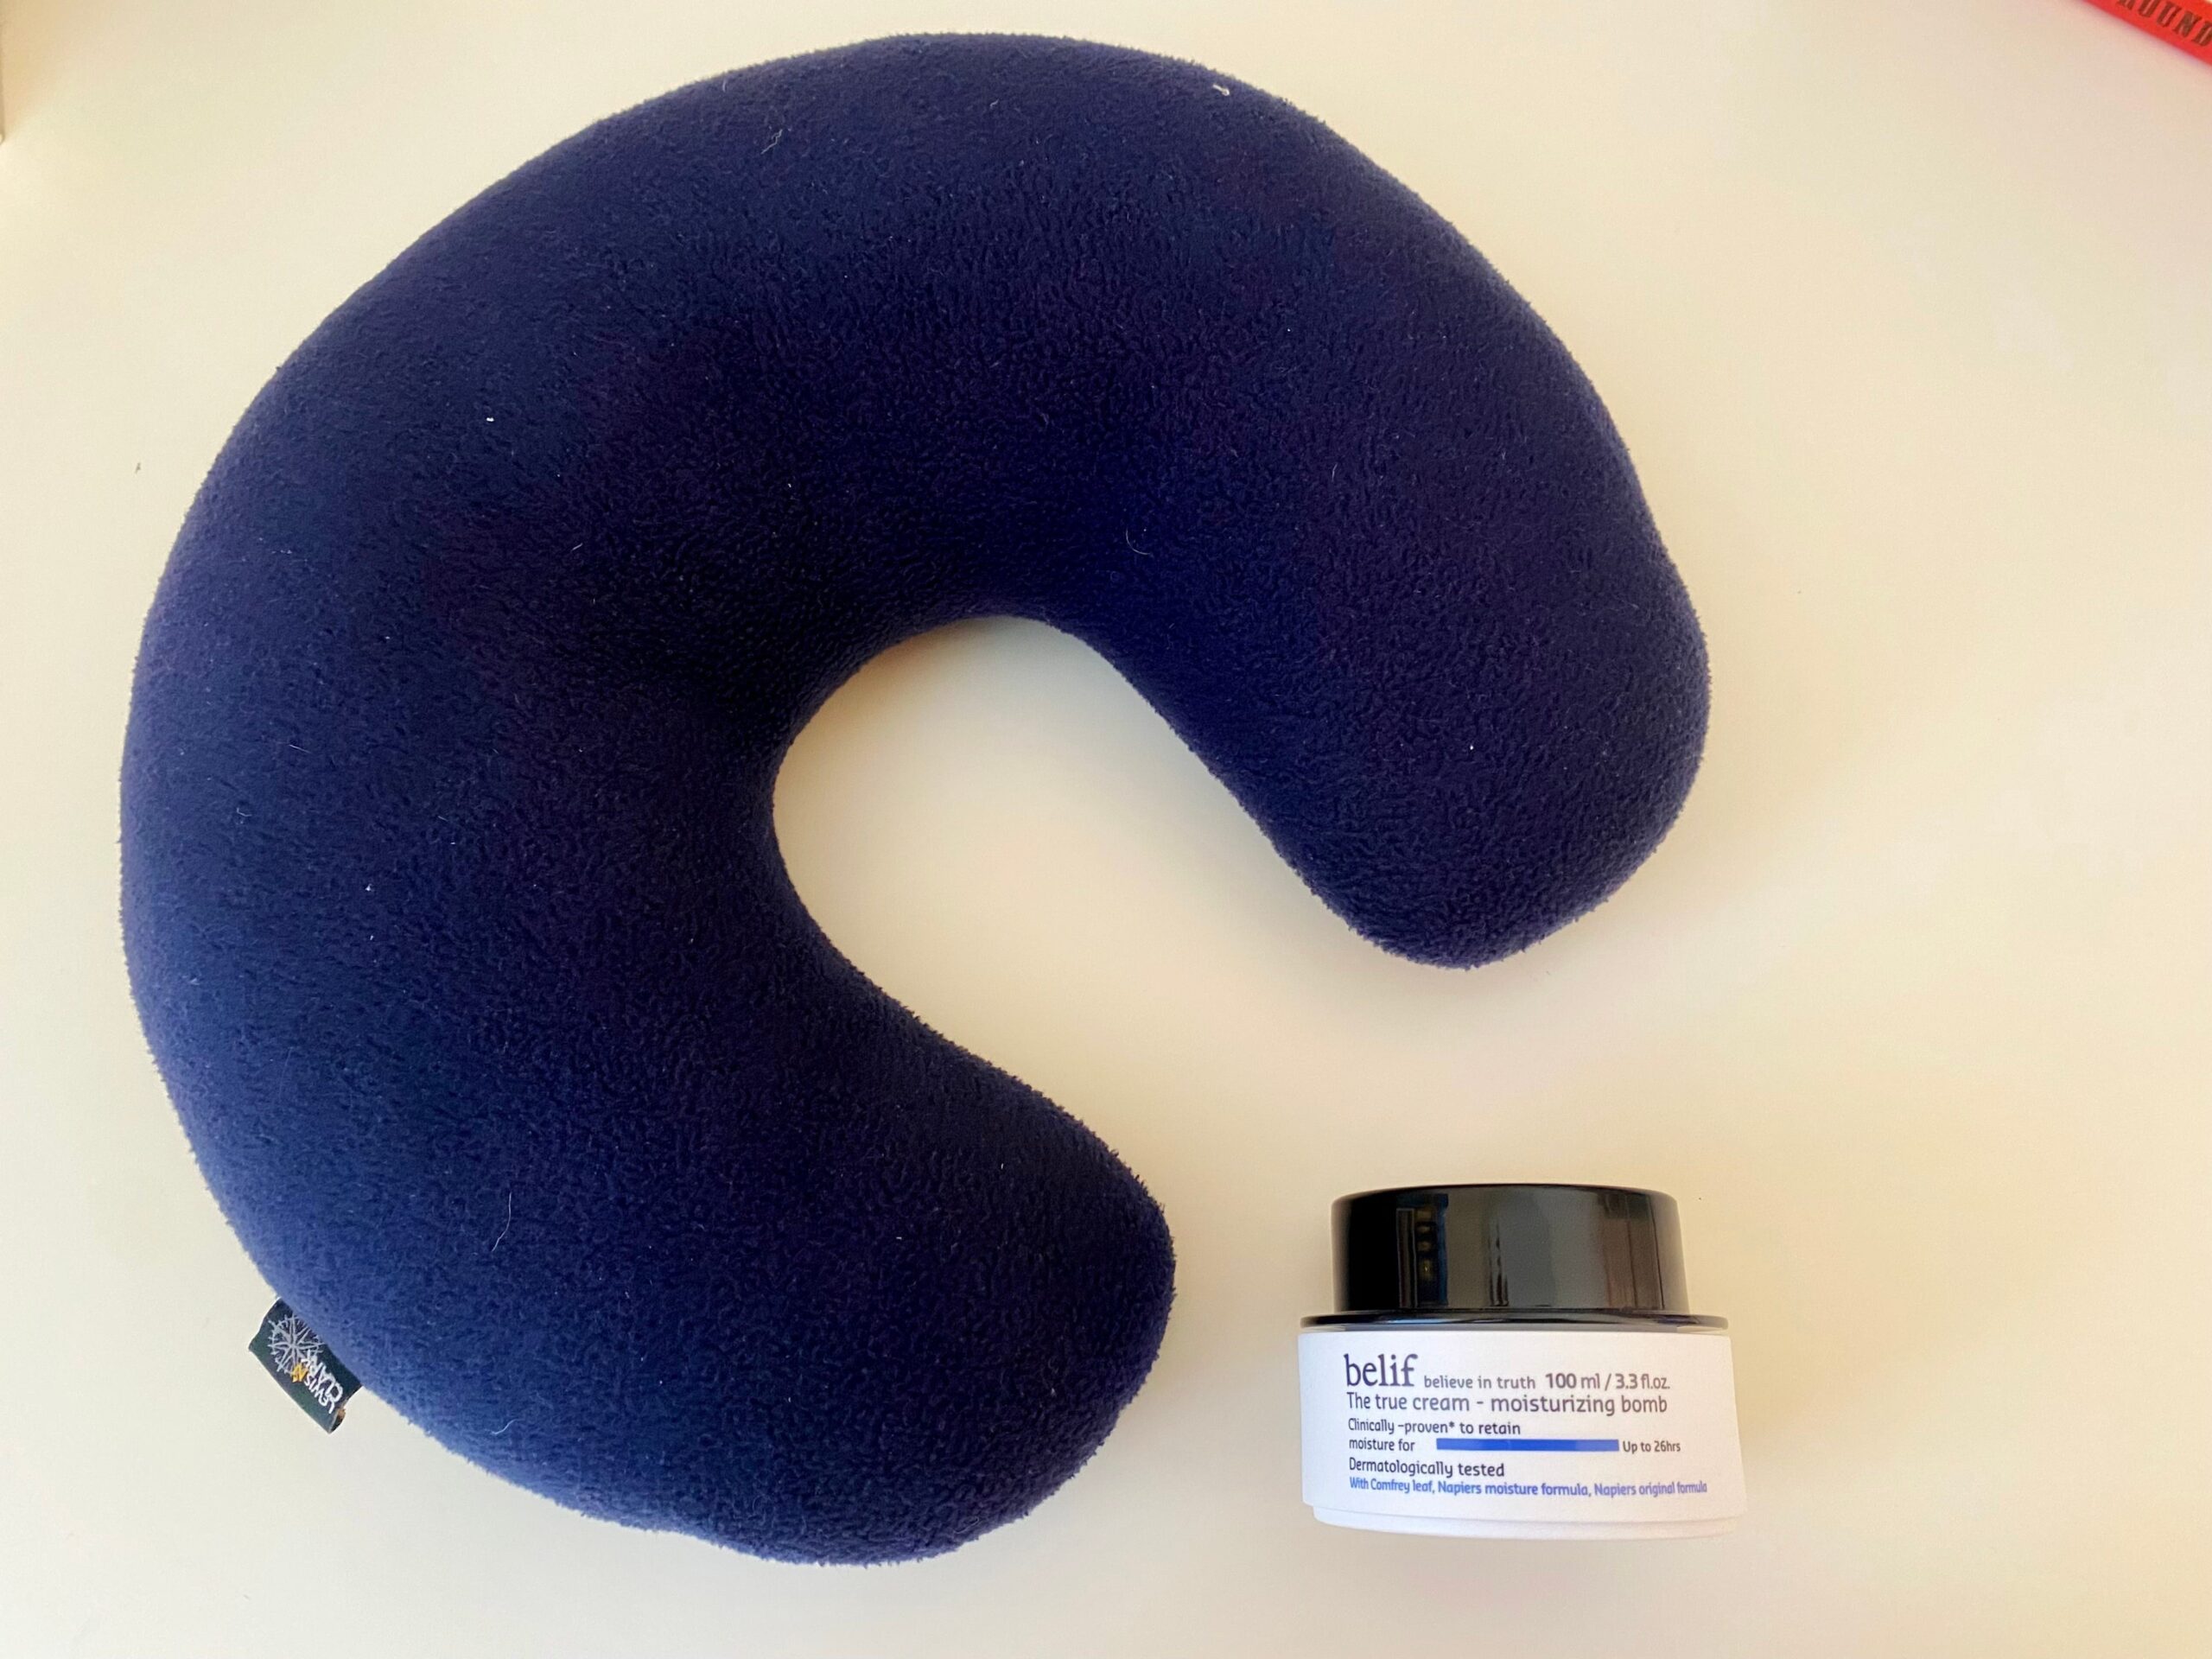 Belif The Moisturizing Bomb with a neck pillow.